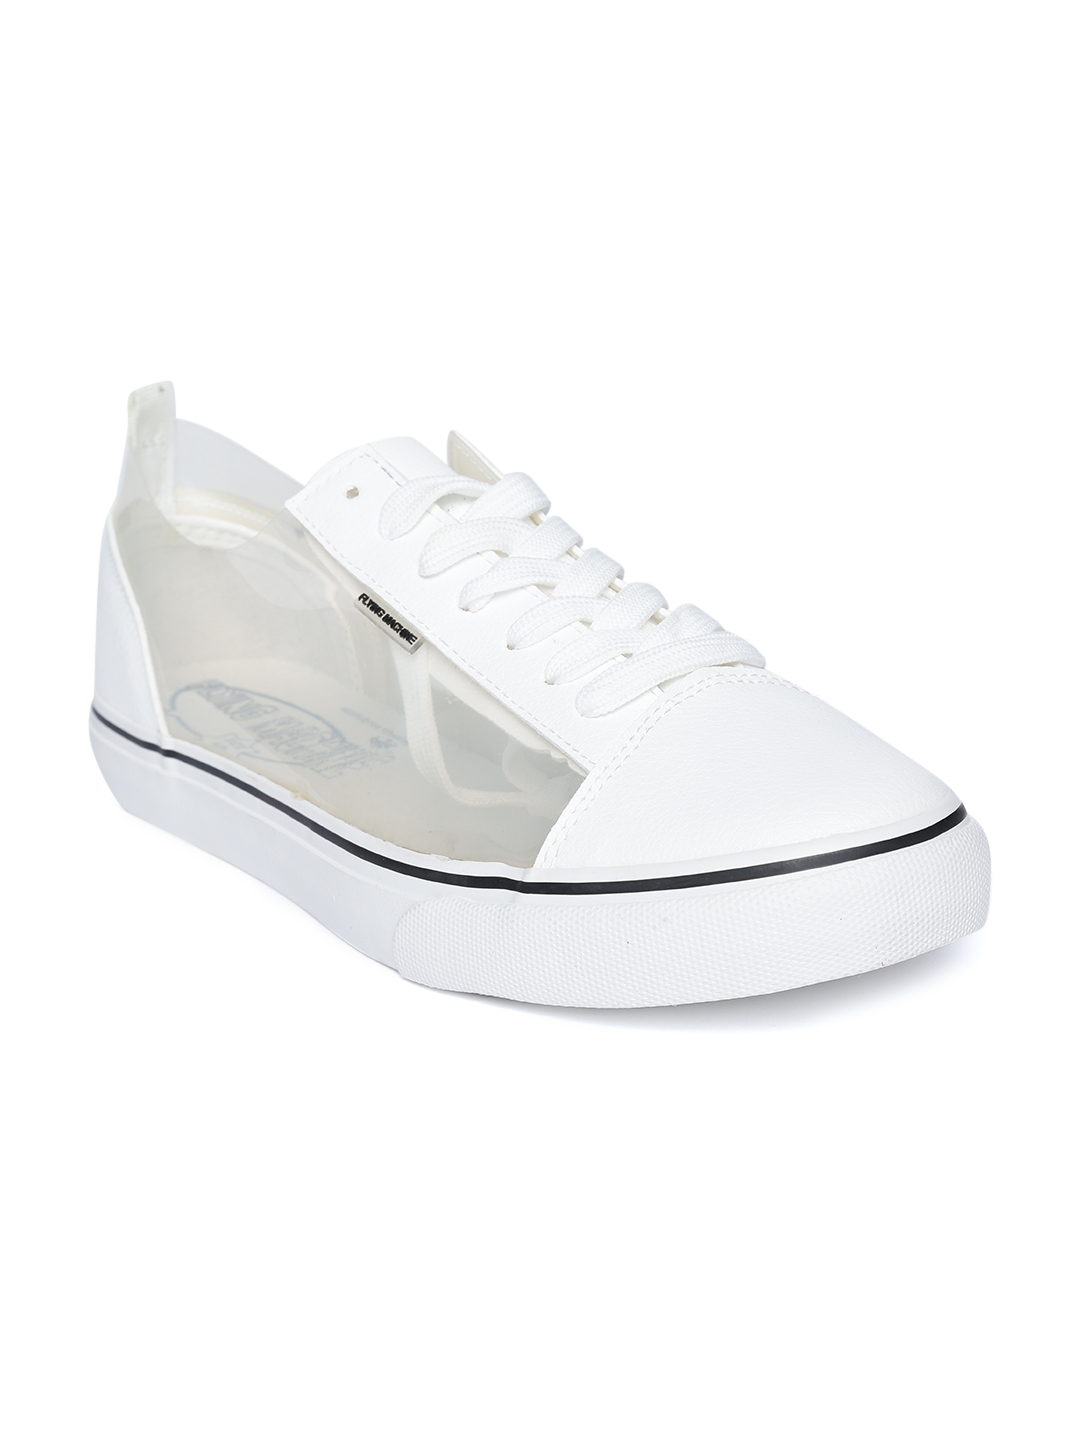 Buy Flying Machine Men White Sneakers  Casual Shoes for Men 2405232   Myntra